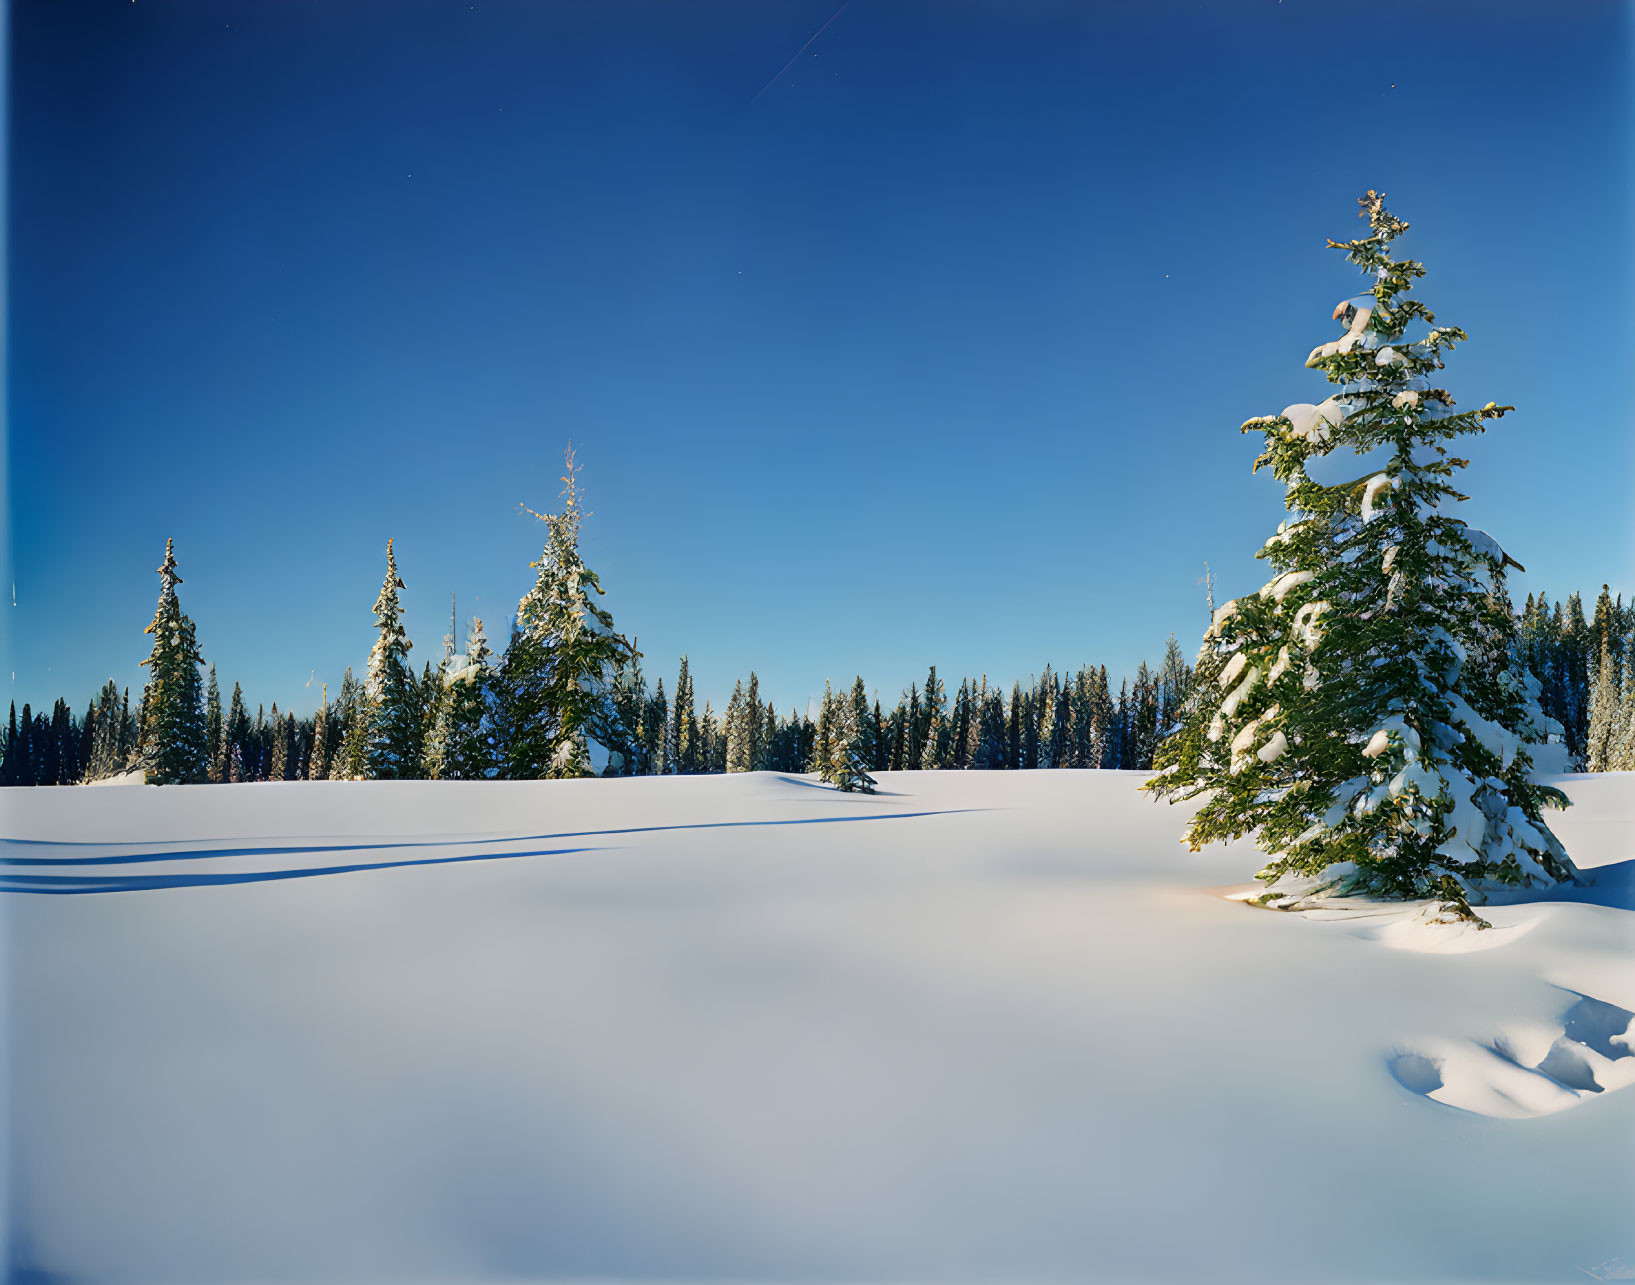 Snow-covered Winter Landscape with Evergreen Trees and Clear Blue Sky